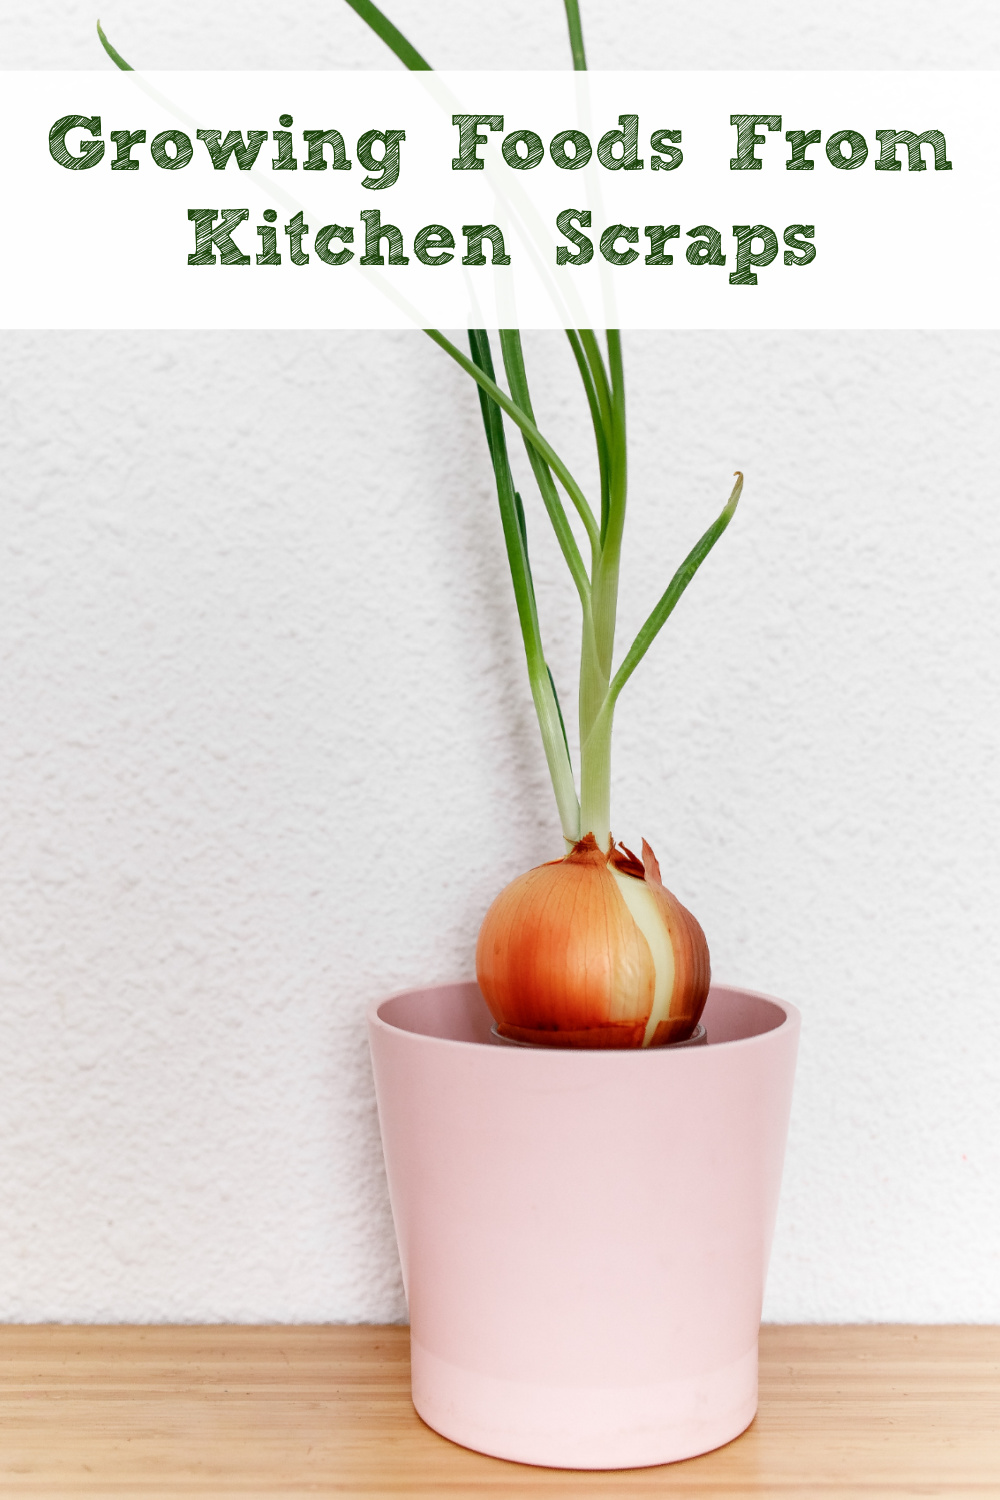 Growing onions from scraps – how to get vegetables for free